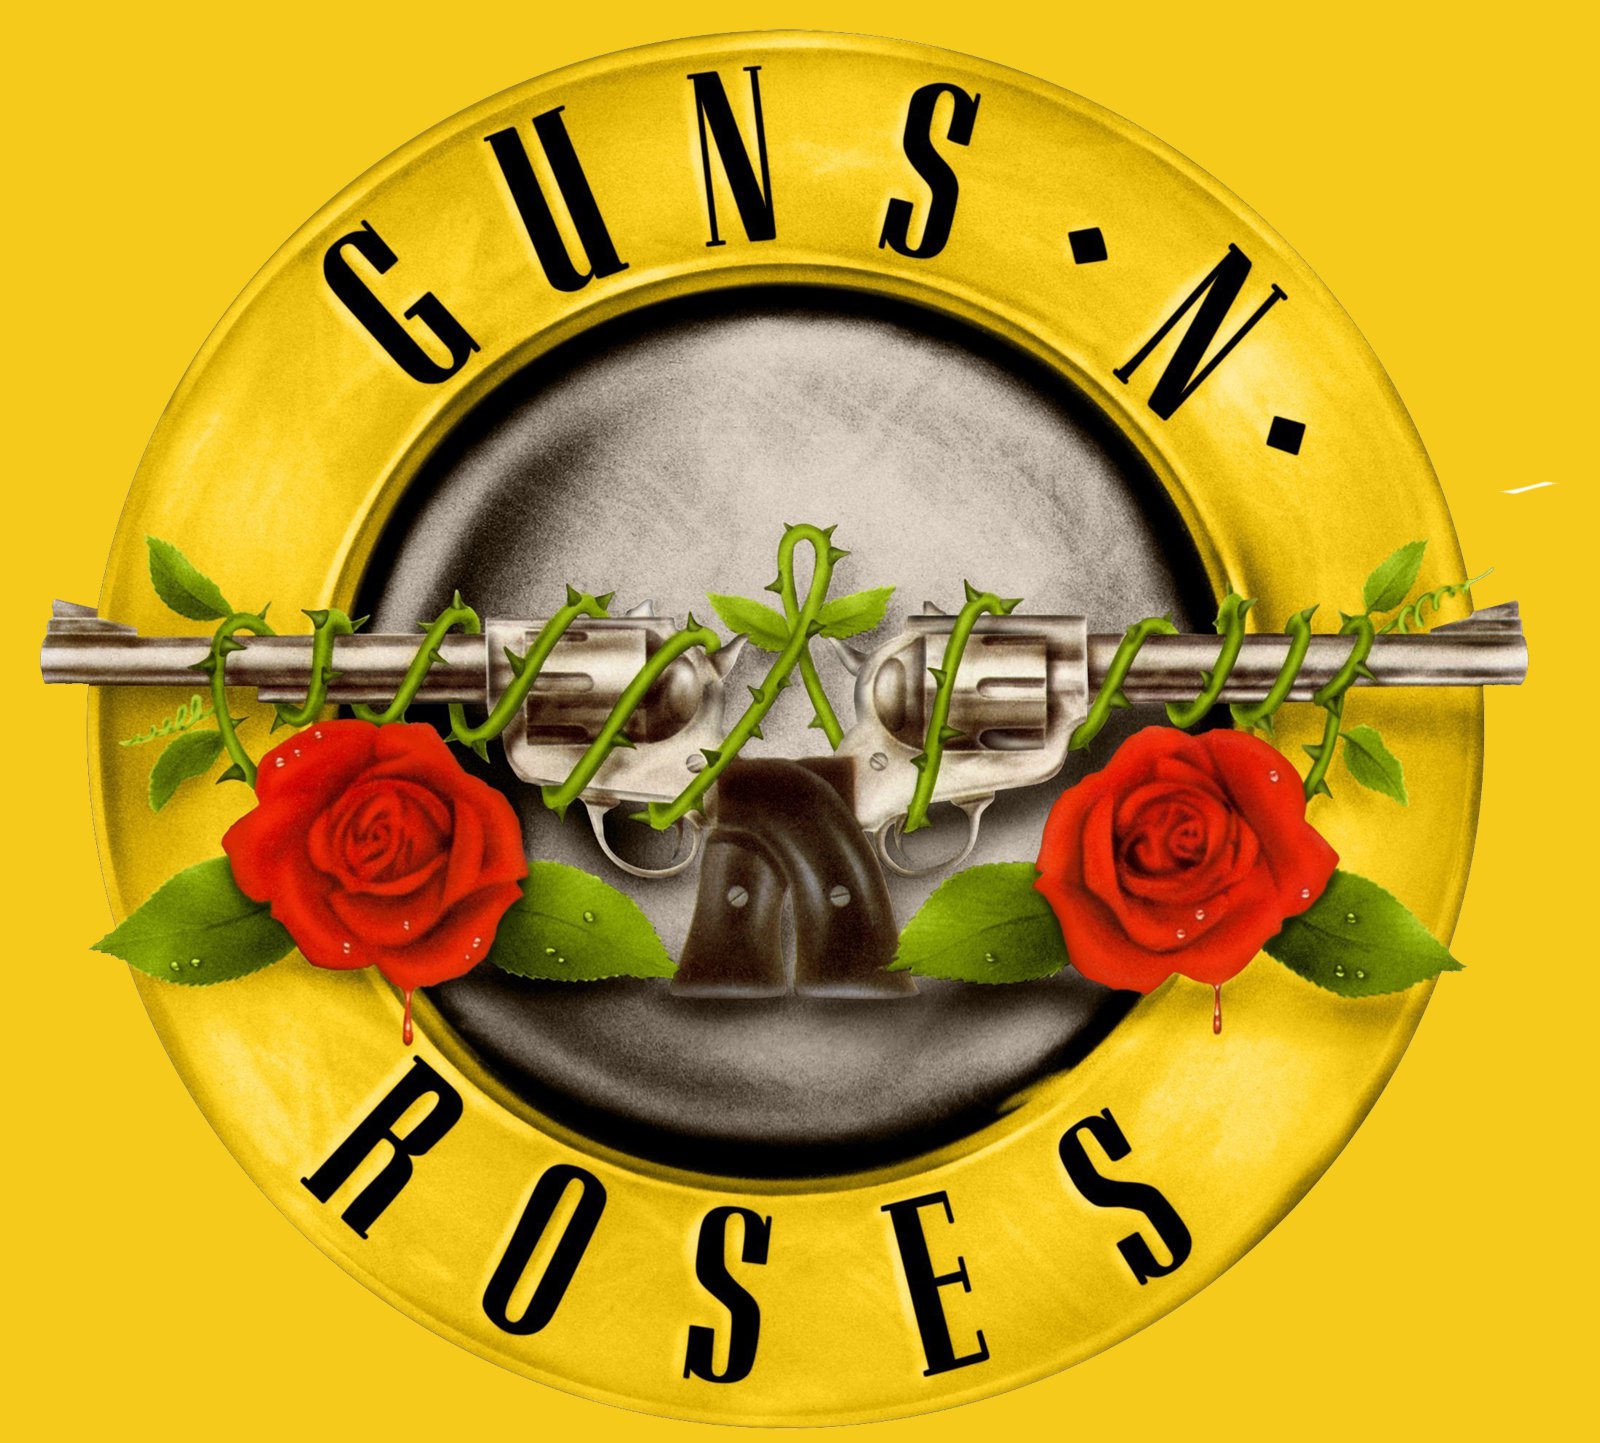 Meaning Guns N' Roses logo and symbol | history and evolution1600 x 1443